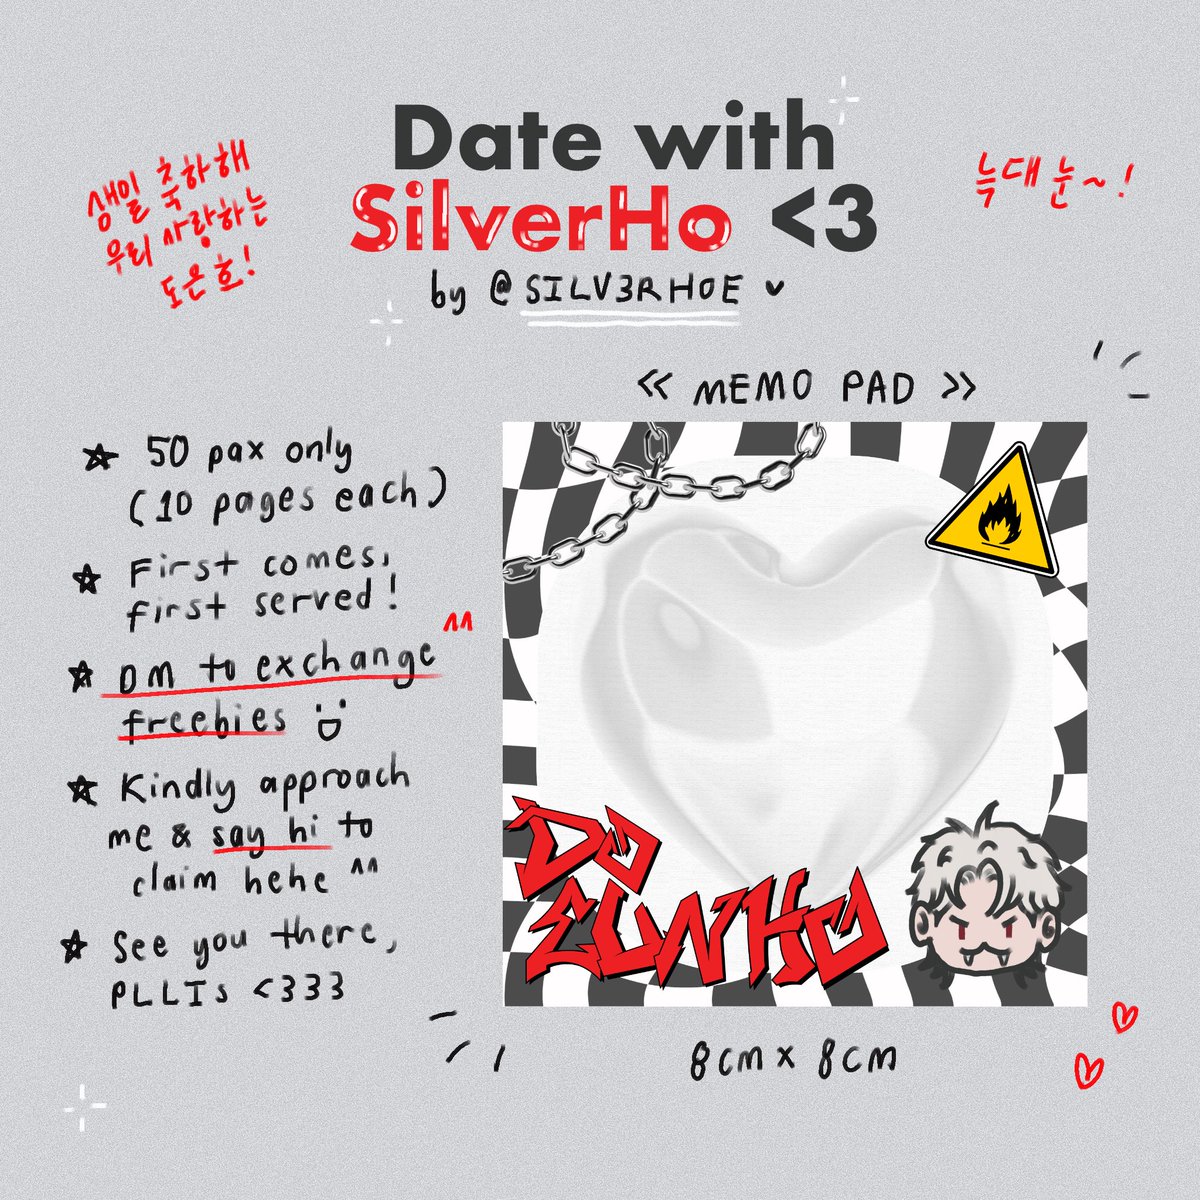 hi MY pllis!! 🤭

ill be giving out freebies on #DateWithSilverHoMY :)) im so excited to meet other pllis since this will be my first time joining plave’s cse! see u there~ 🫶

ps. the quantity is limited so i had to ration the memo pads huhuhu dm if u want to exchange w me! ❤️